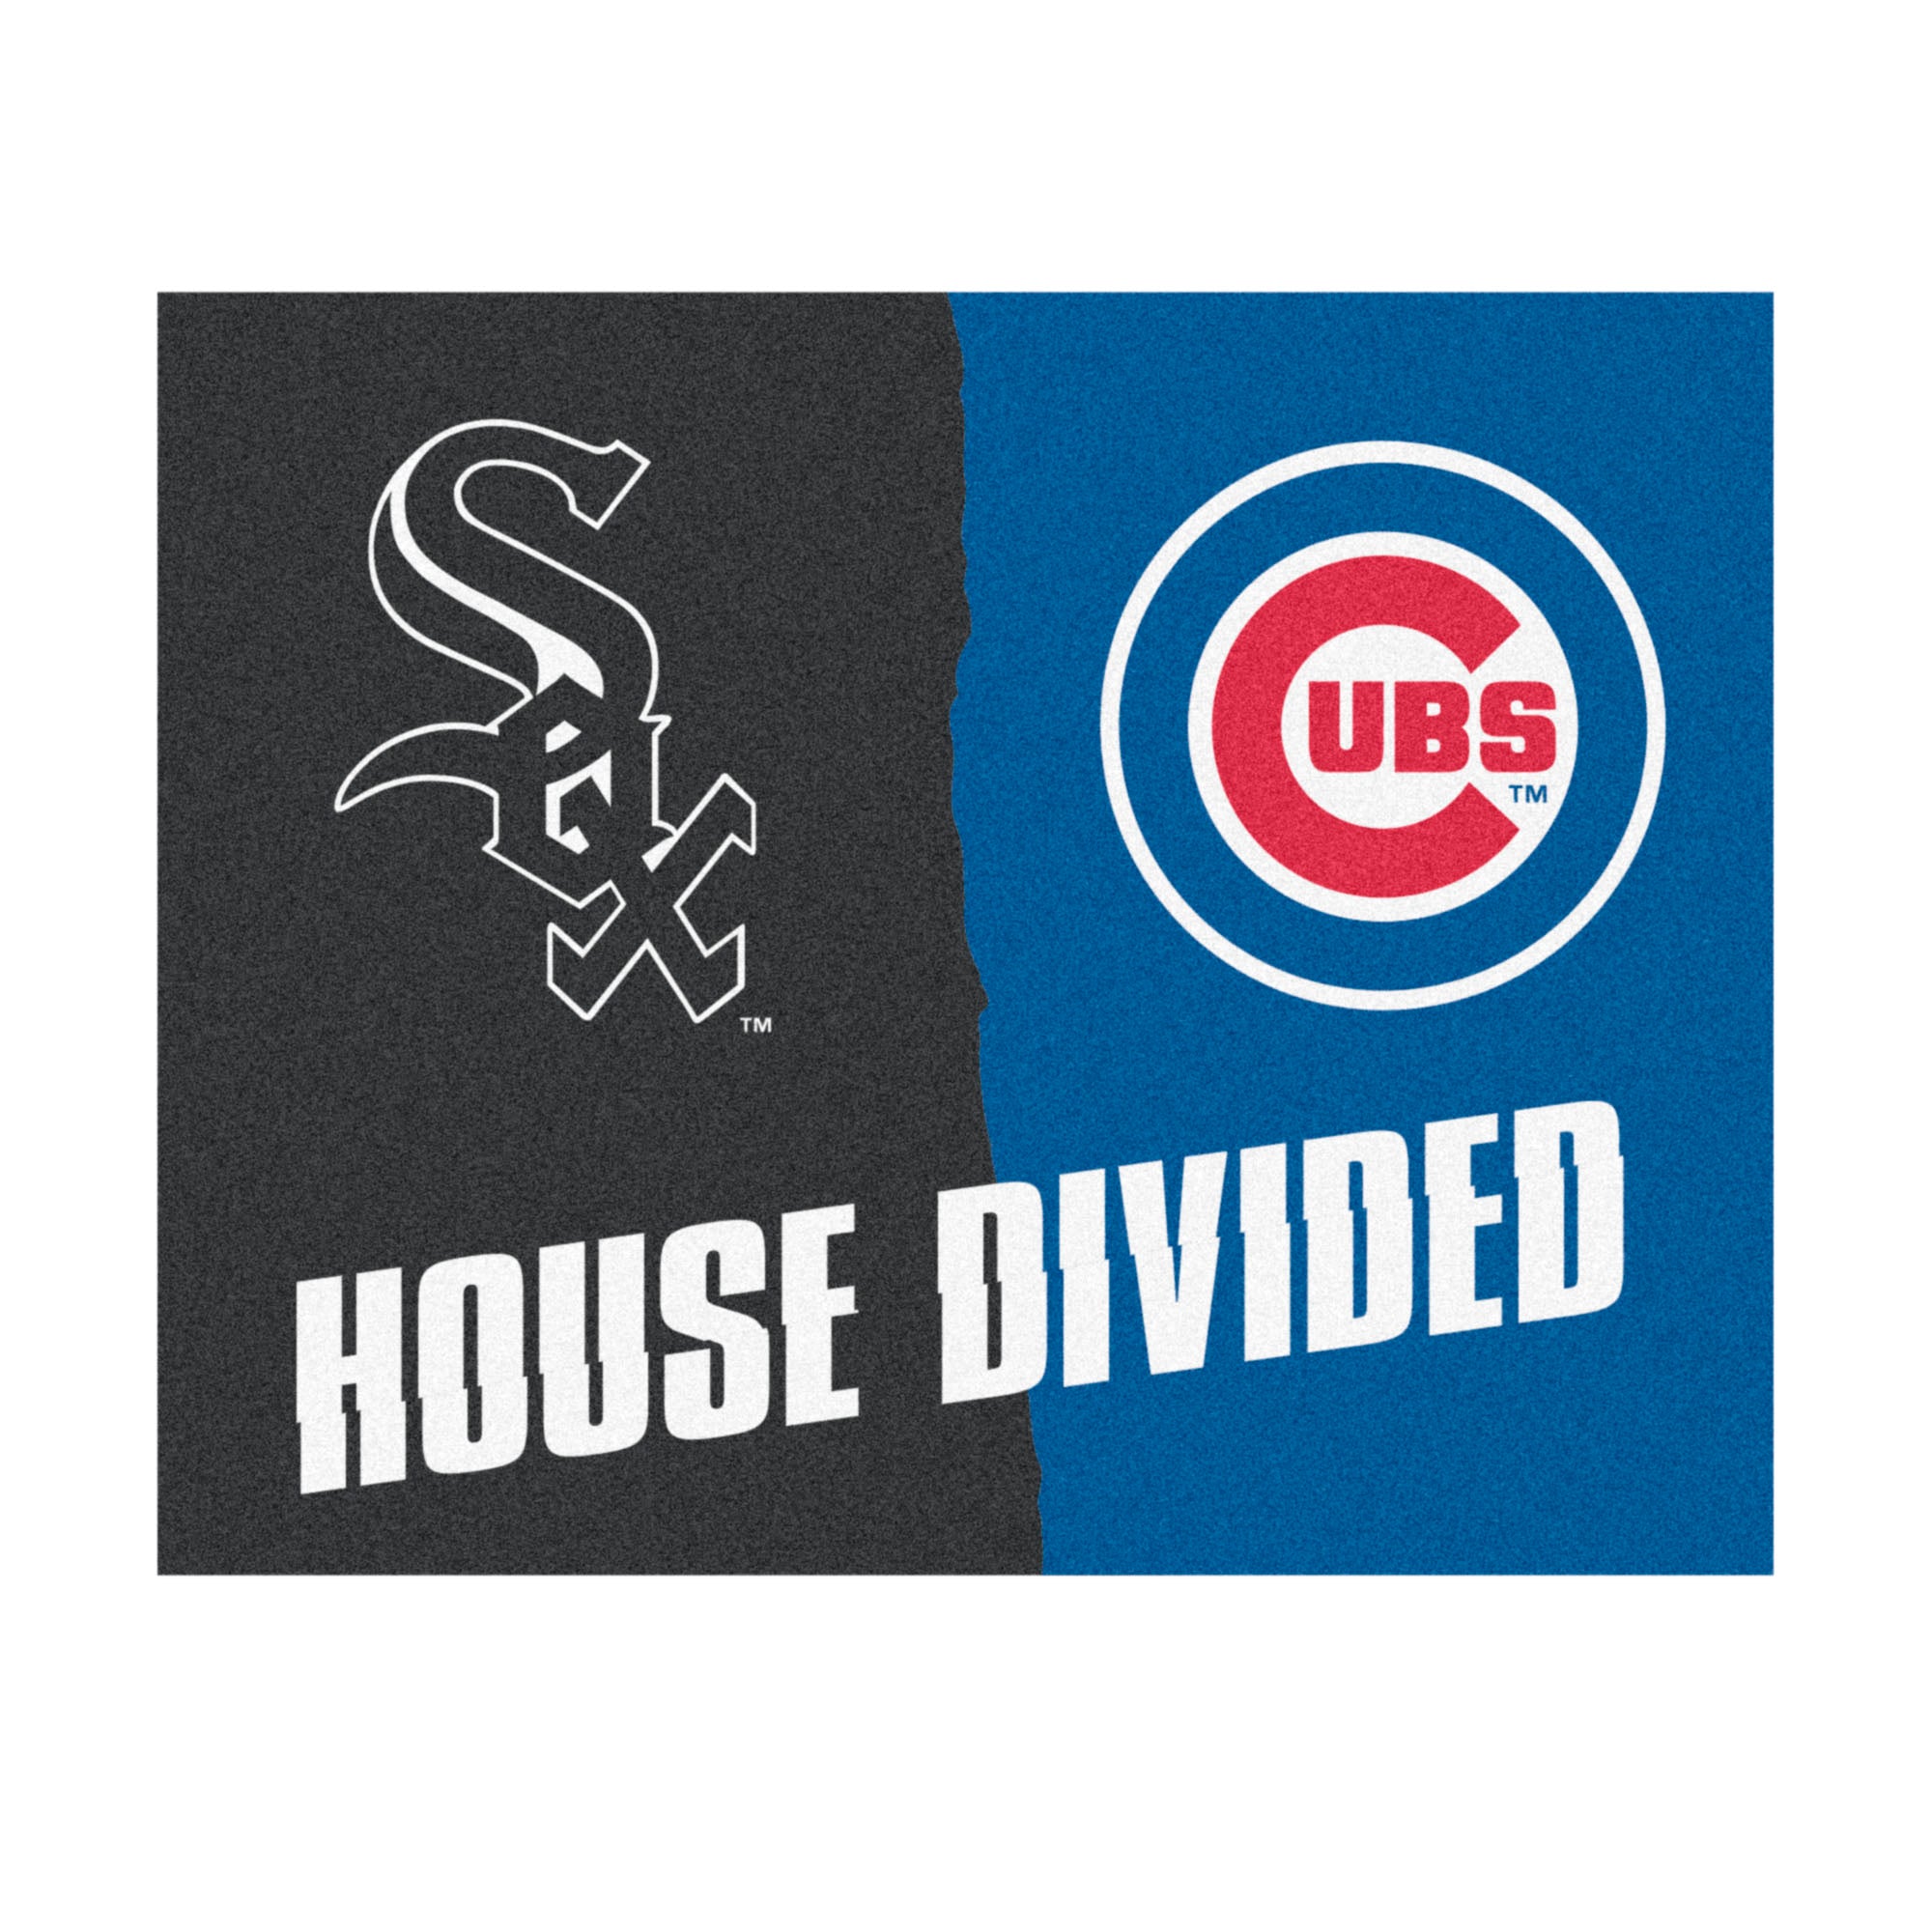 FANMATS, MLB House Divided - Yankees / Indians House Divided Rug